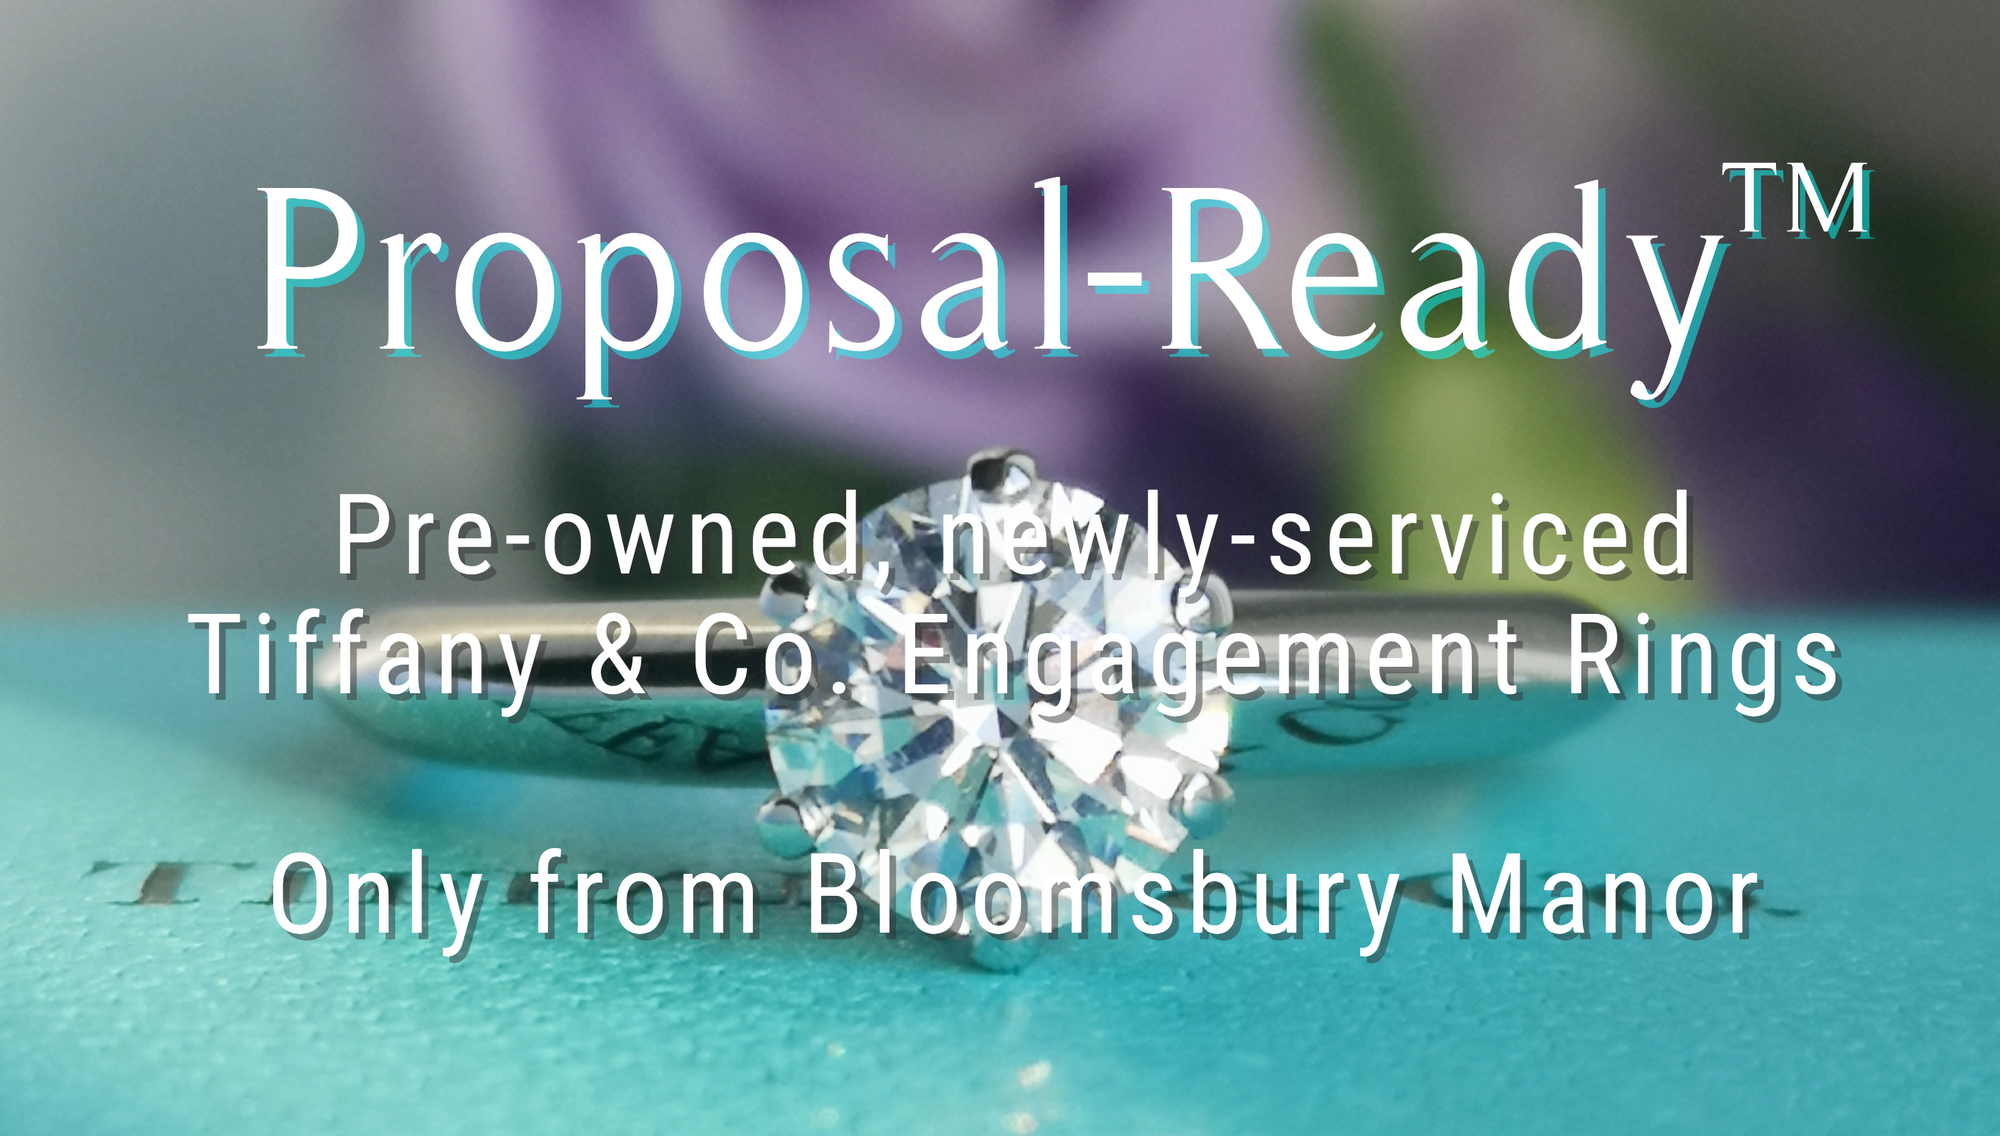 Proposal-Ready™ pre-owned Tiffany & Co Engagement Rings. Only from Bloomsbury Manor